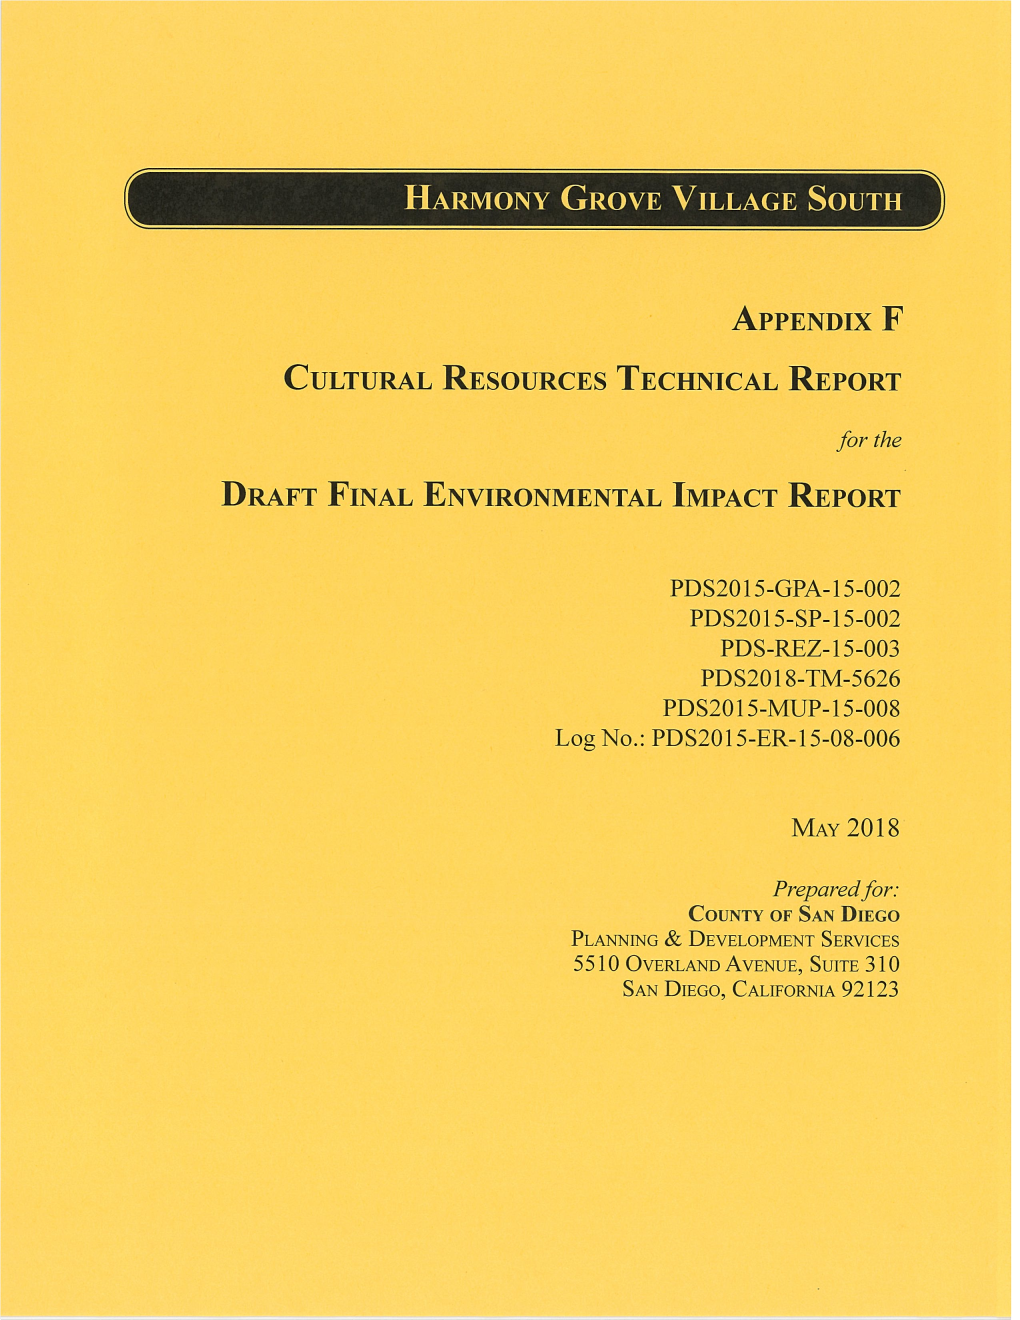 Cultural Resources Technical Report